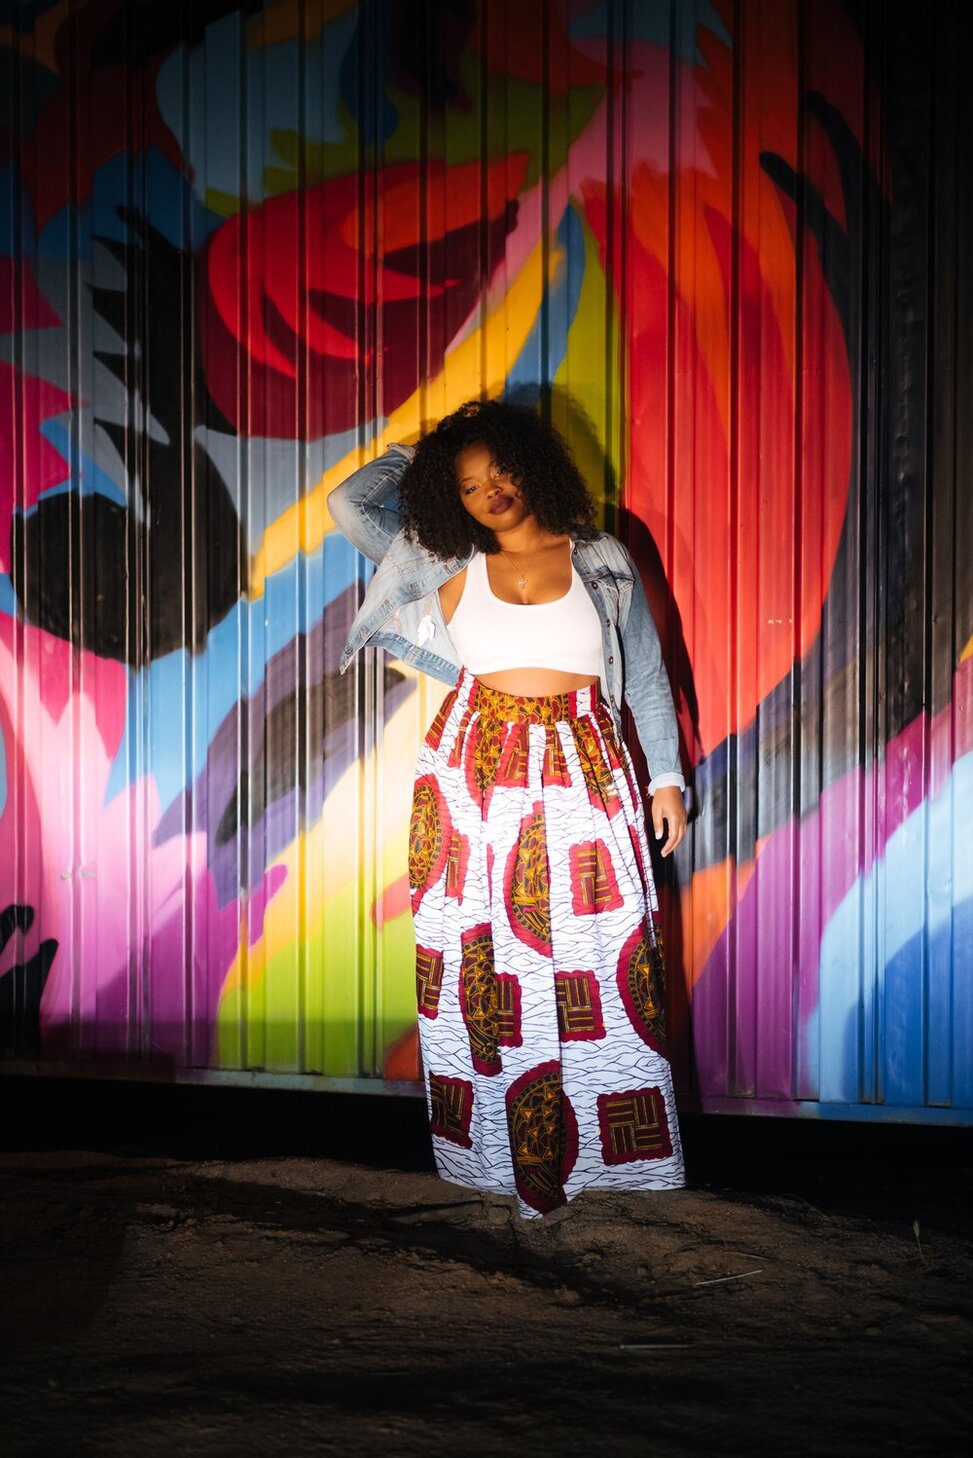 black woman leaning against a graffiti wall wearing a white top with printed pants